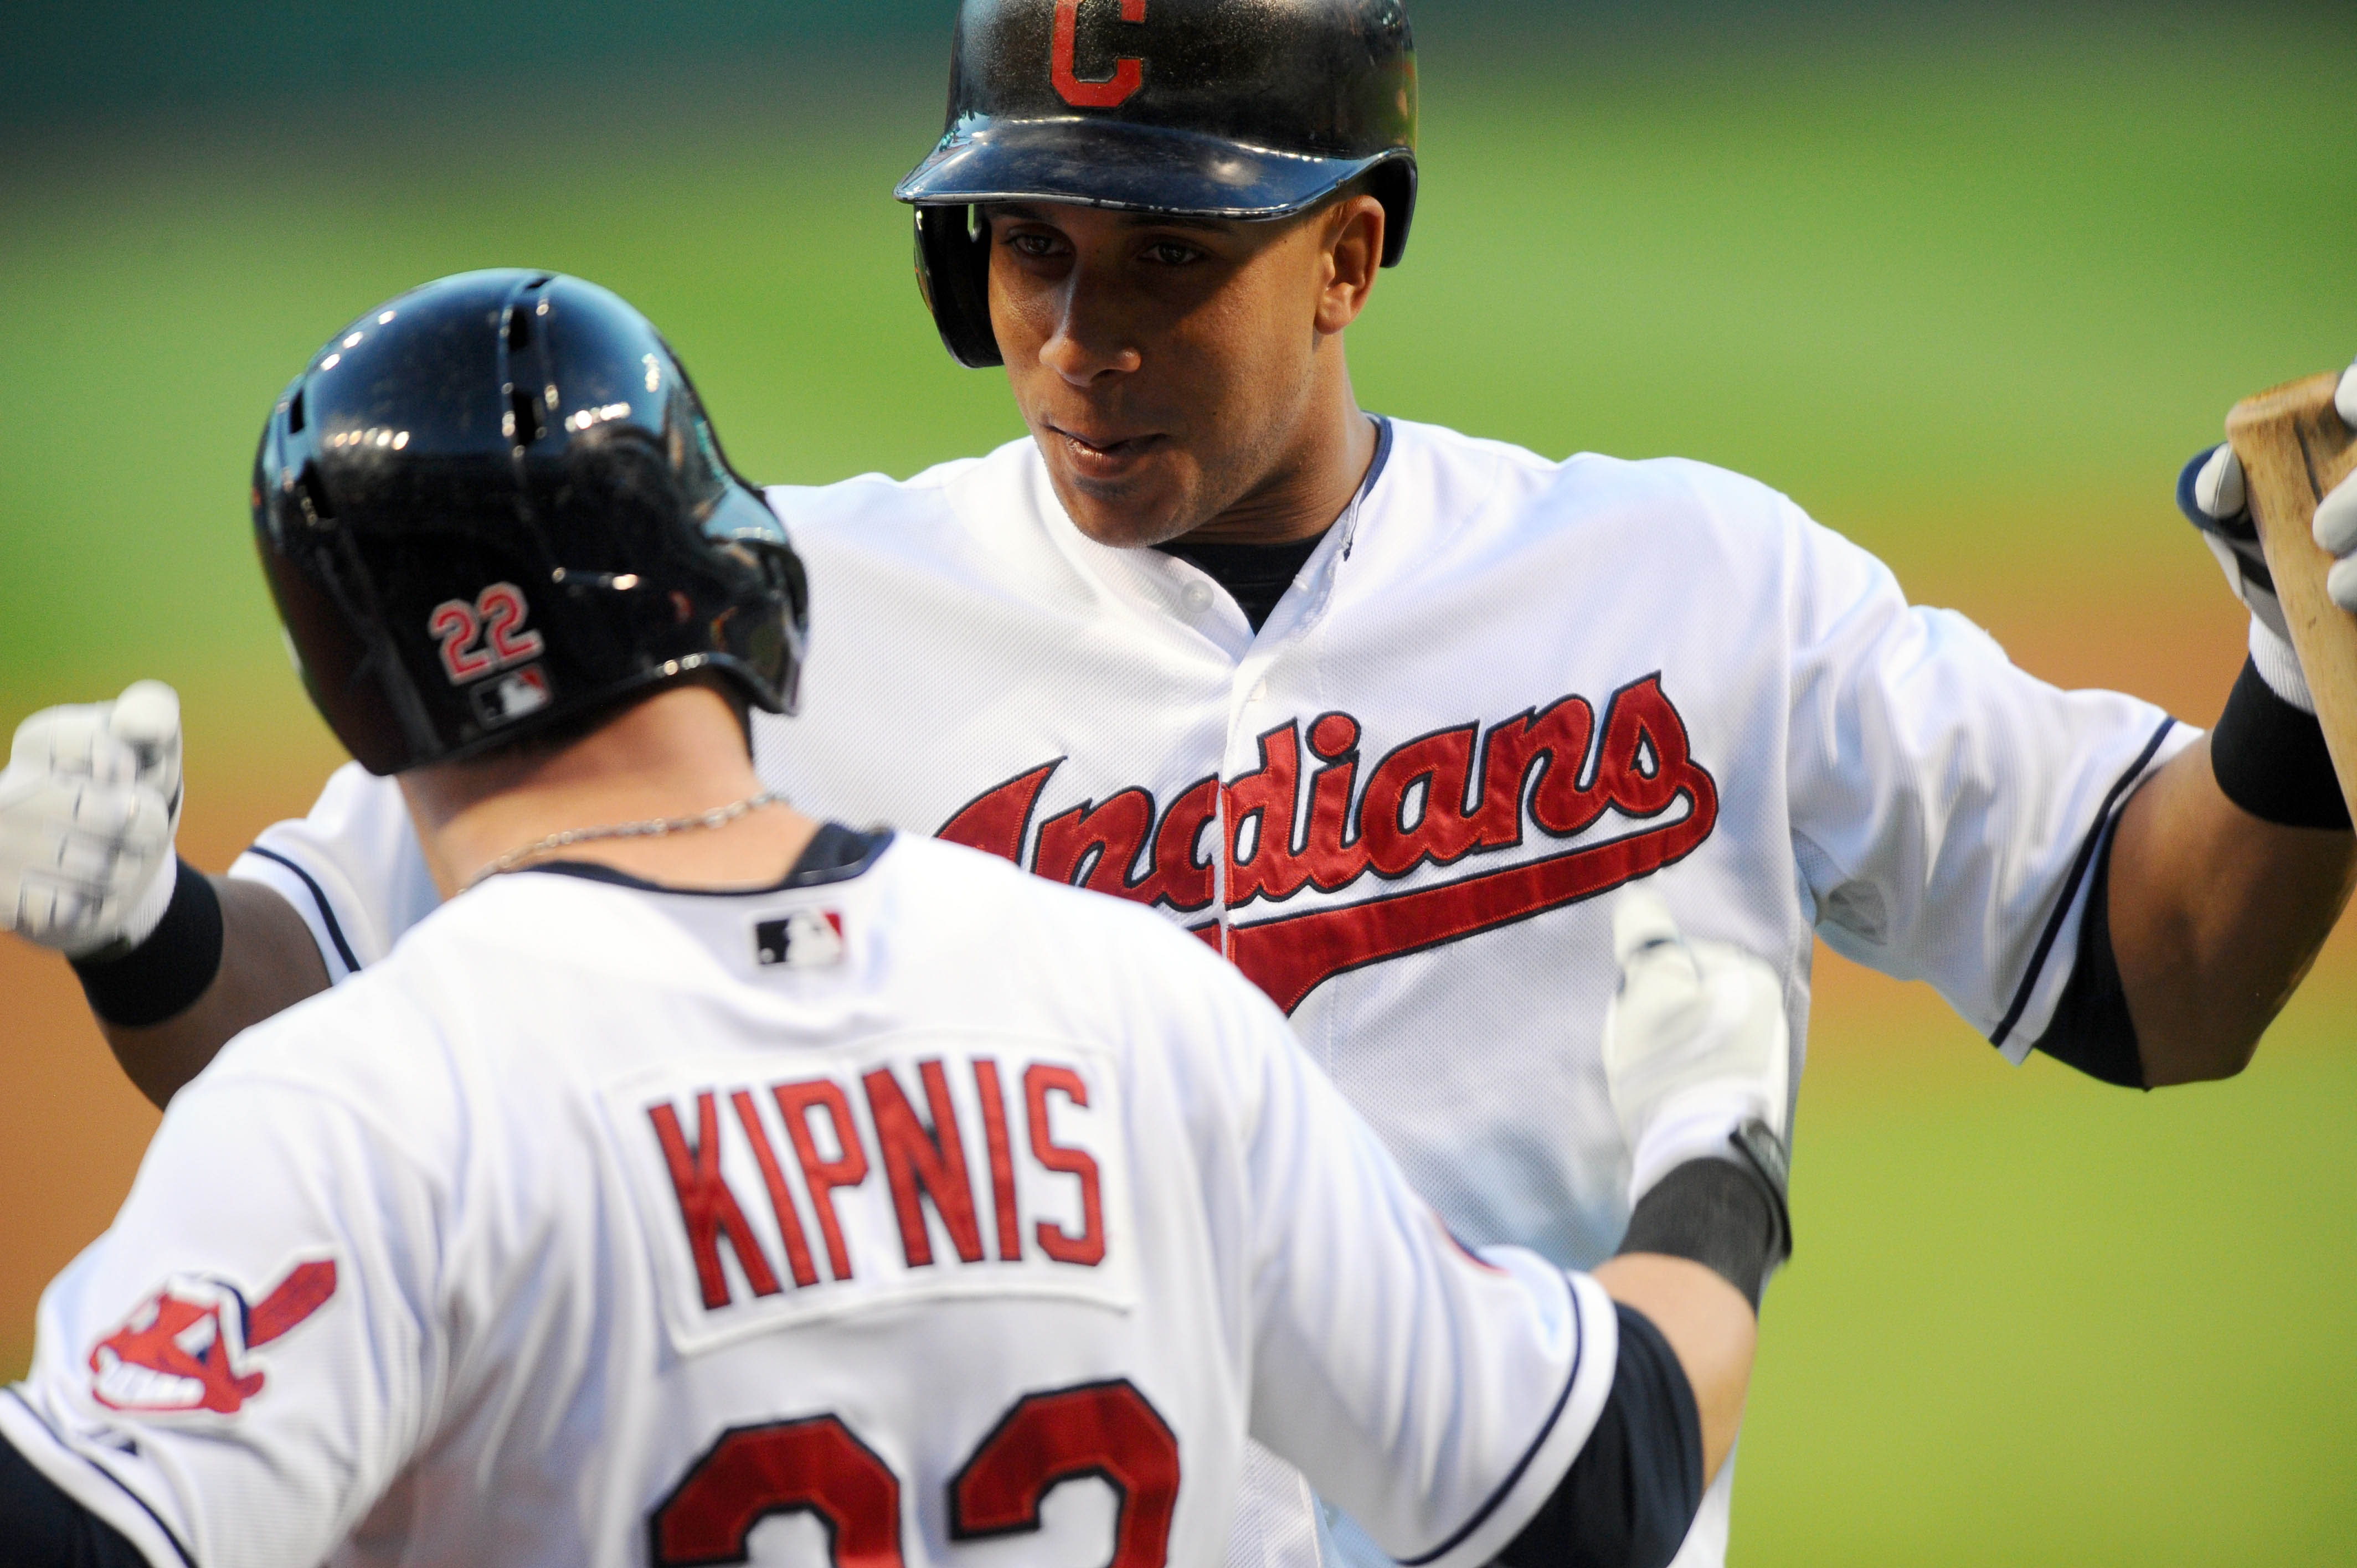 10 May 2015: Cleveland Indians Left field Michael Brantley (23